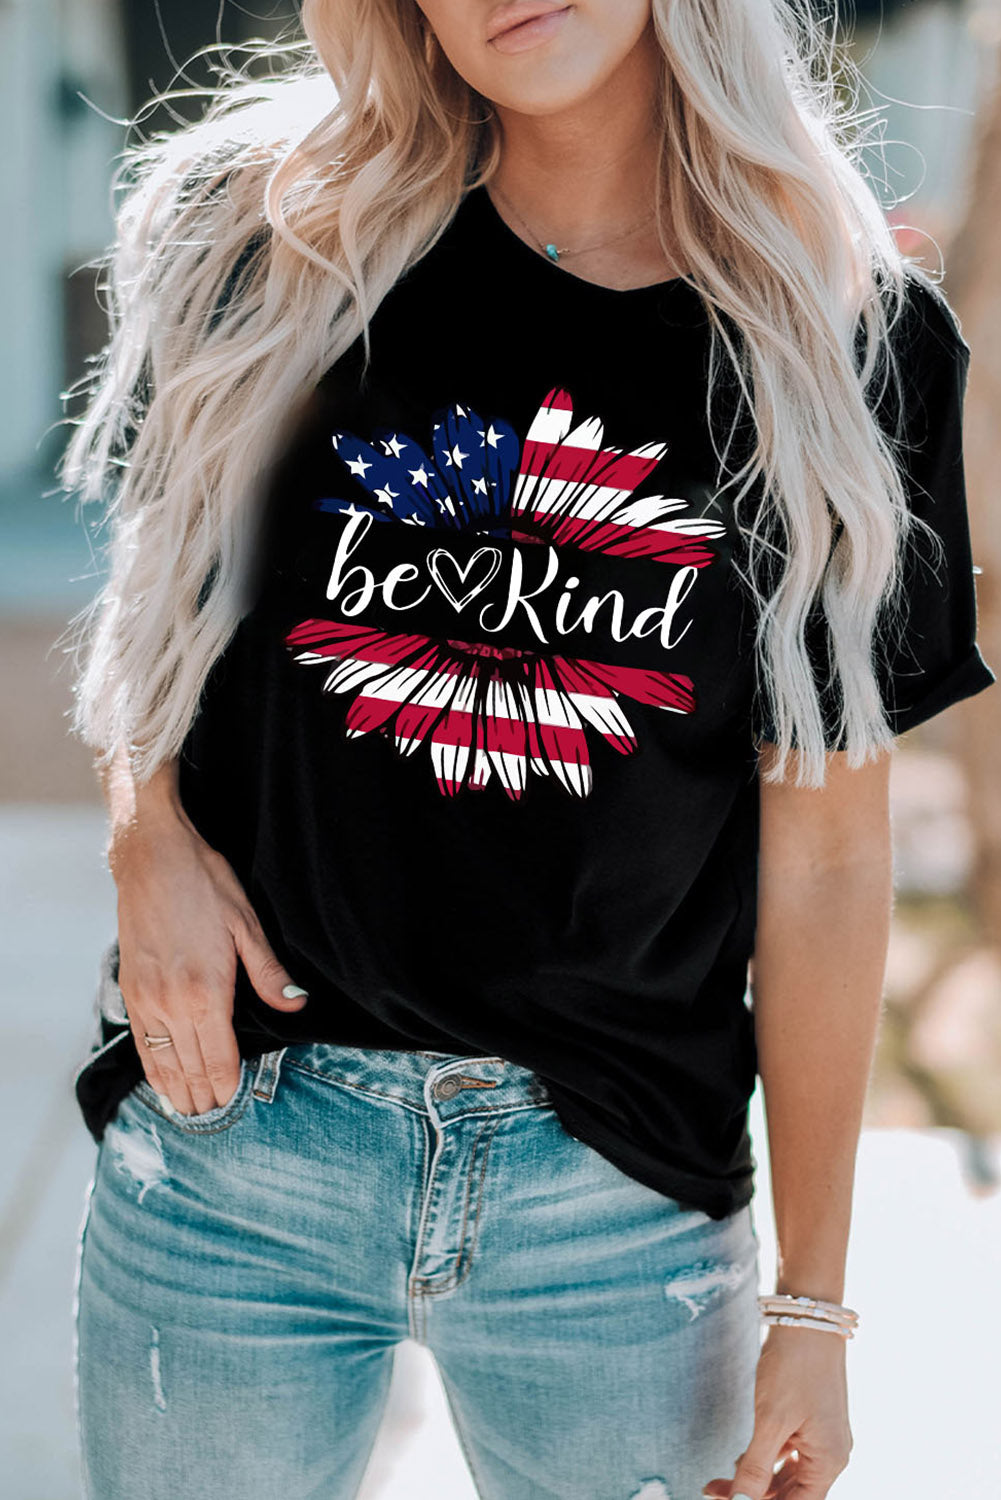 Womens Misses Unisex Be Kind Daisy Flag Graphic Tee Black Red, White, Blue USA Flag DTG Graphic Daisy Flower Floral T-Shirt Design for Memorial Day, Labor Day, July 4th Fourth of July, Patriotic Apparel